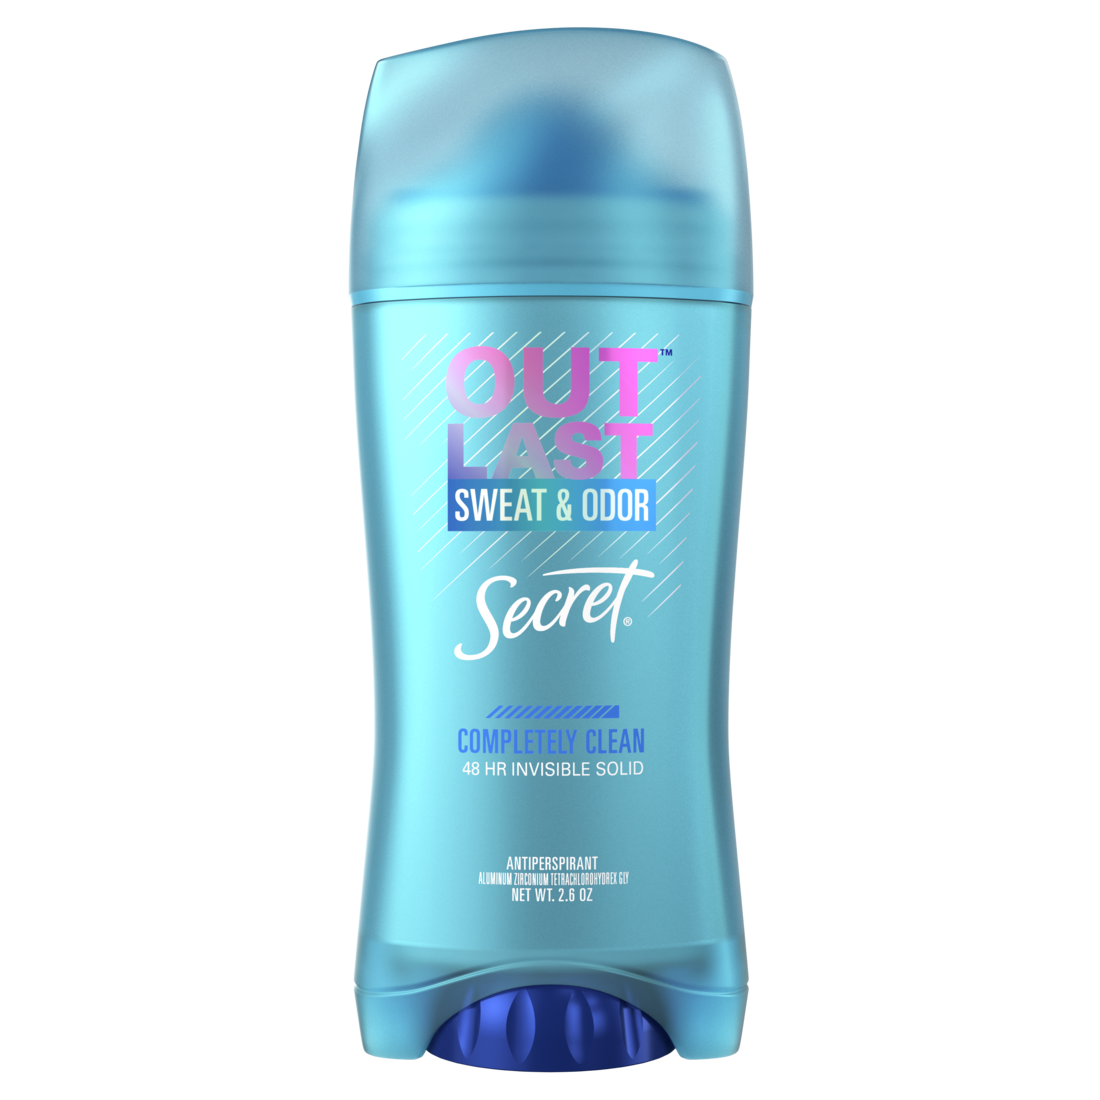 Secret Outlast Invisible Solid Deodorant Completely Clean - 2.6oz/12pk